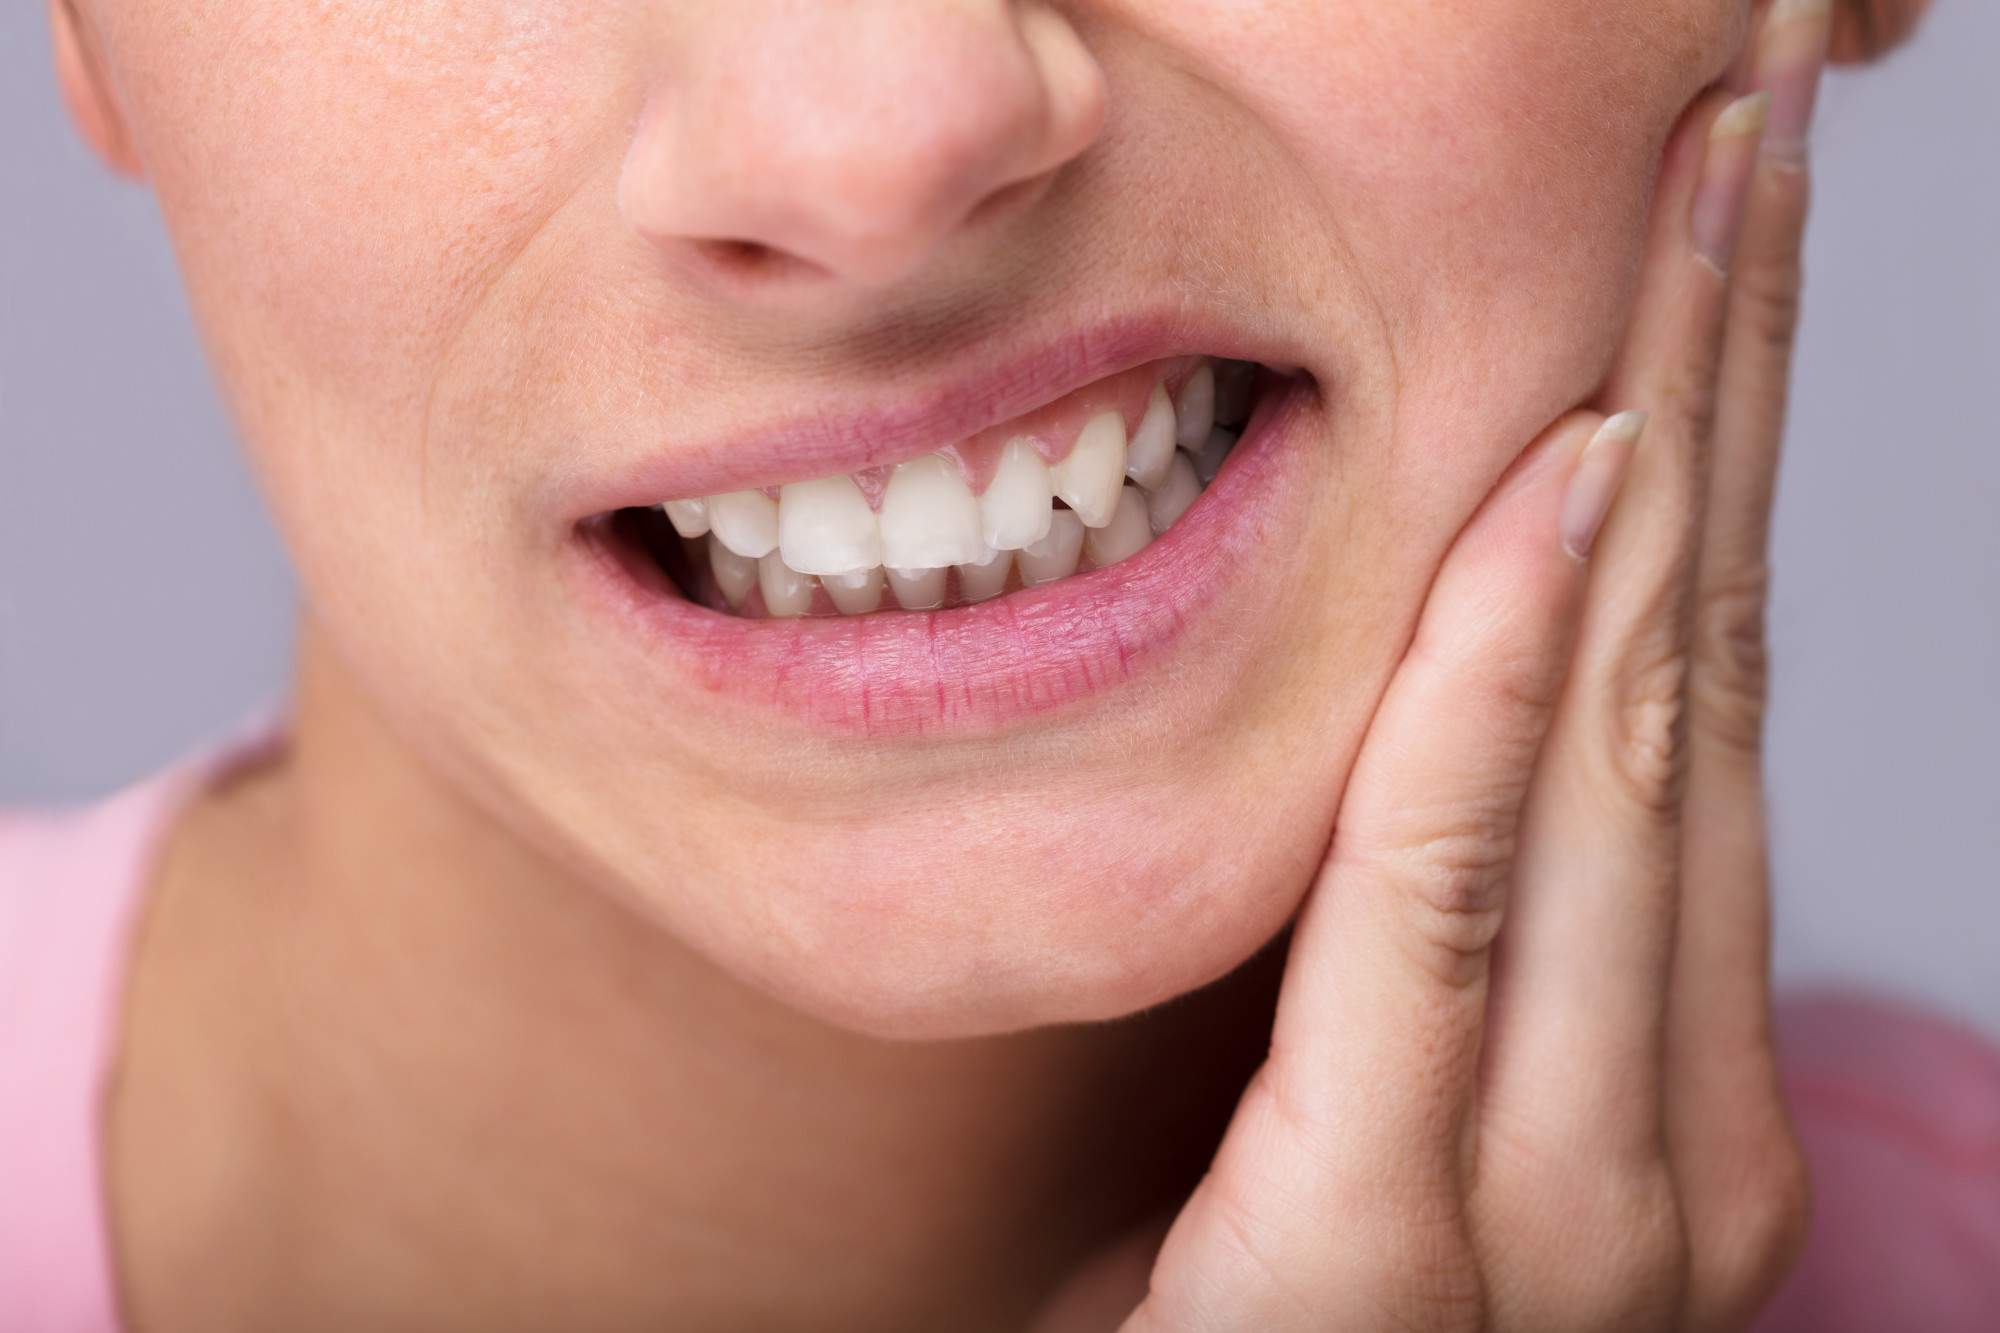 What Are Third Molars?